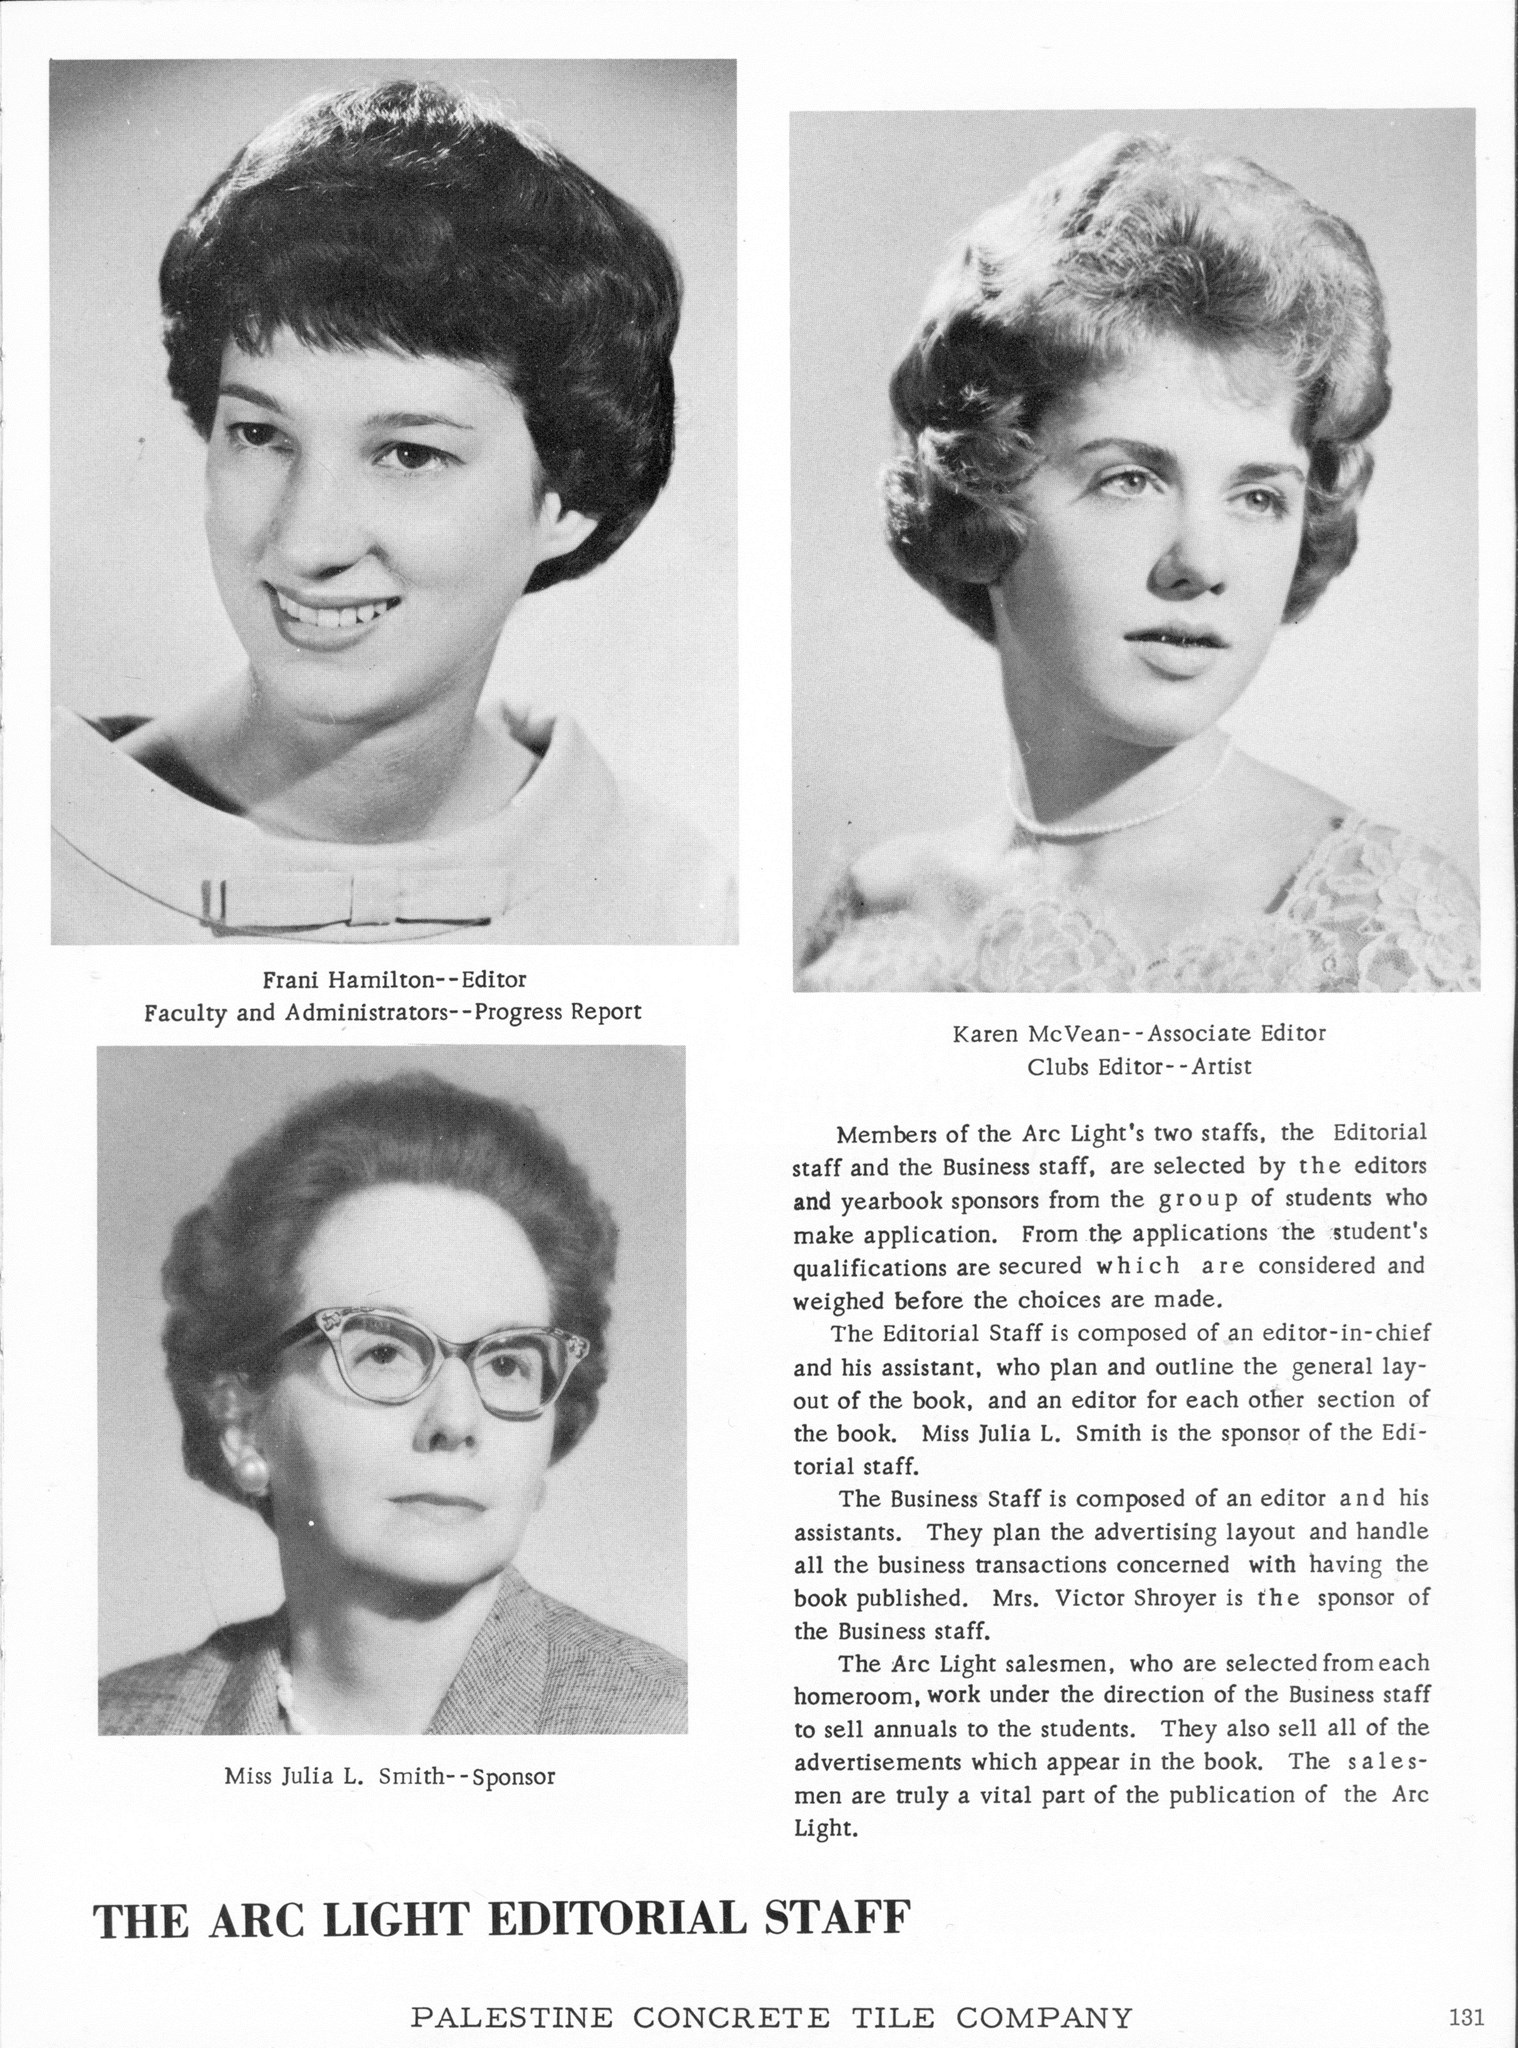 ../../../Images/Large/1961/Arclight-1961-pg0131.jpg